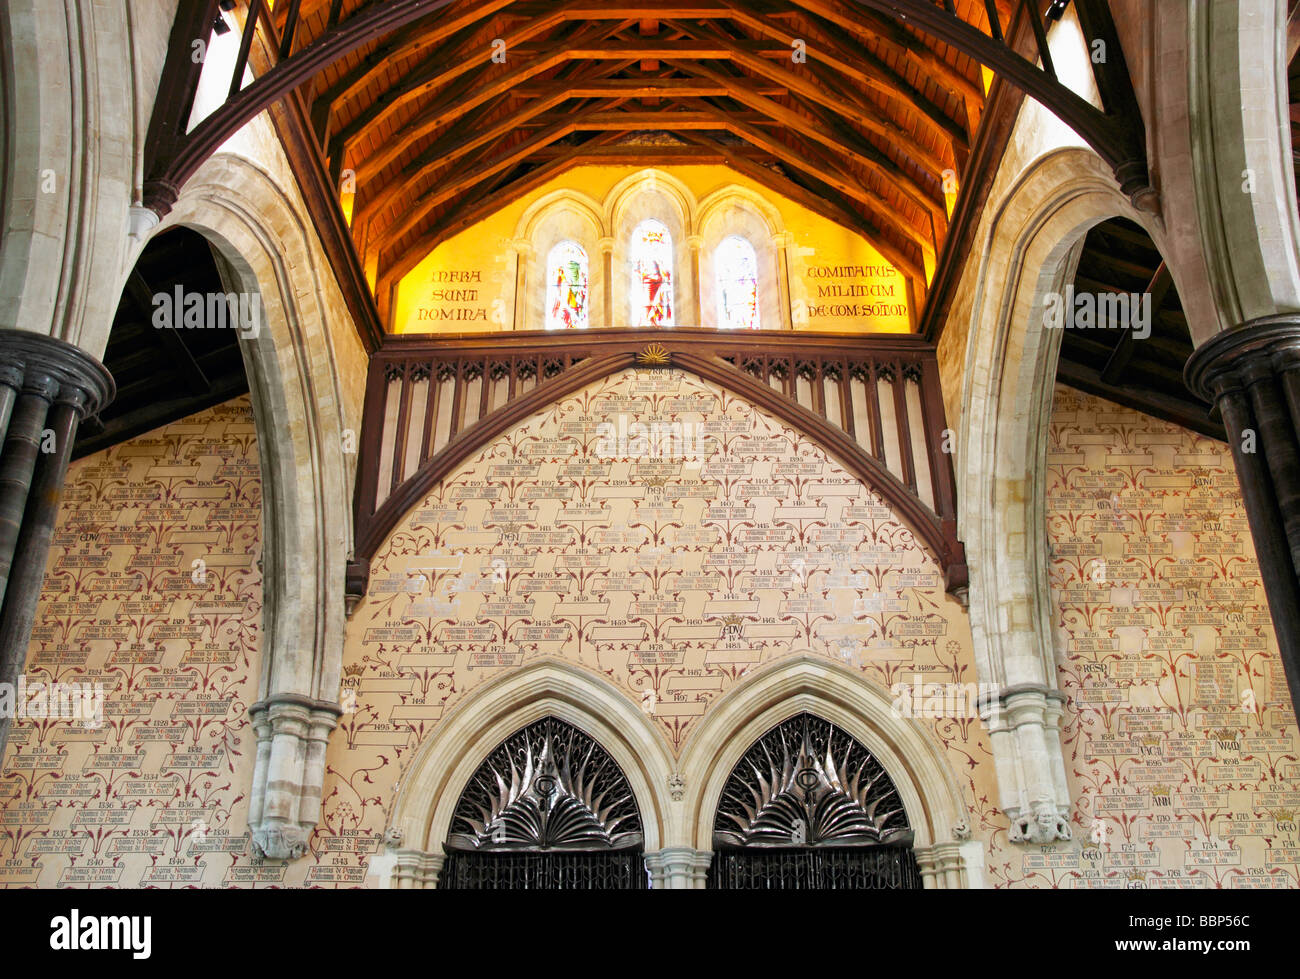 Le Grand Hall, château de Winchester, Winchester, Hampshire, Angleterre, Royaume-Uni Banque D'Images